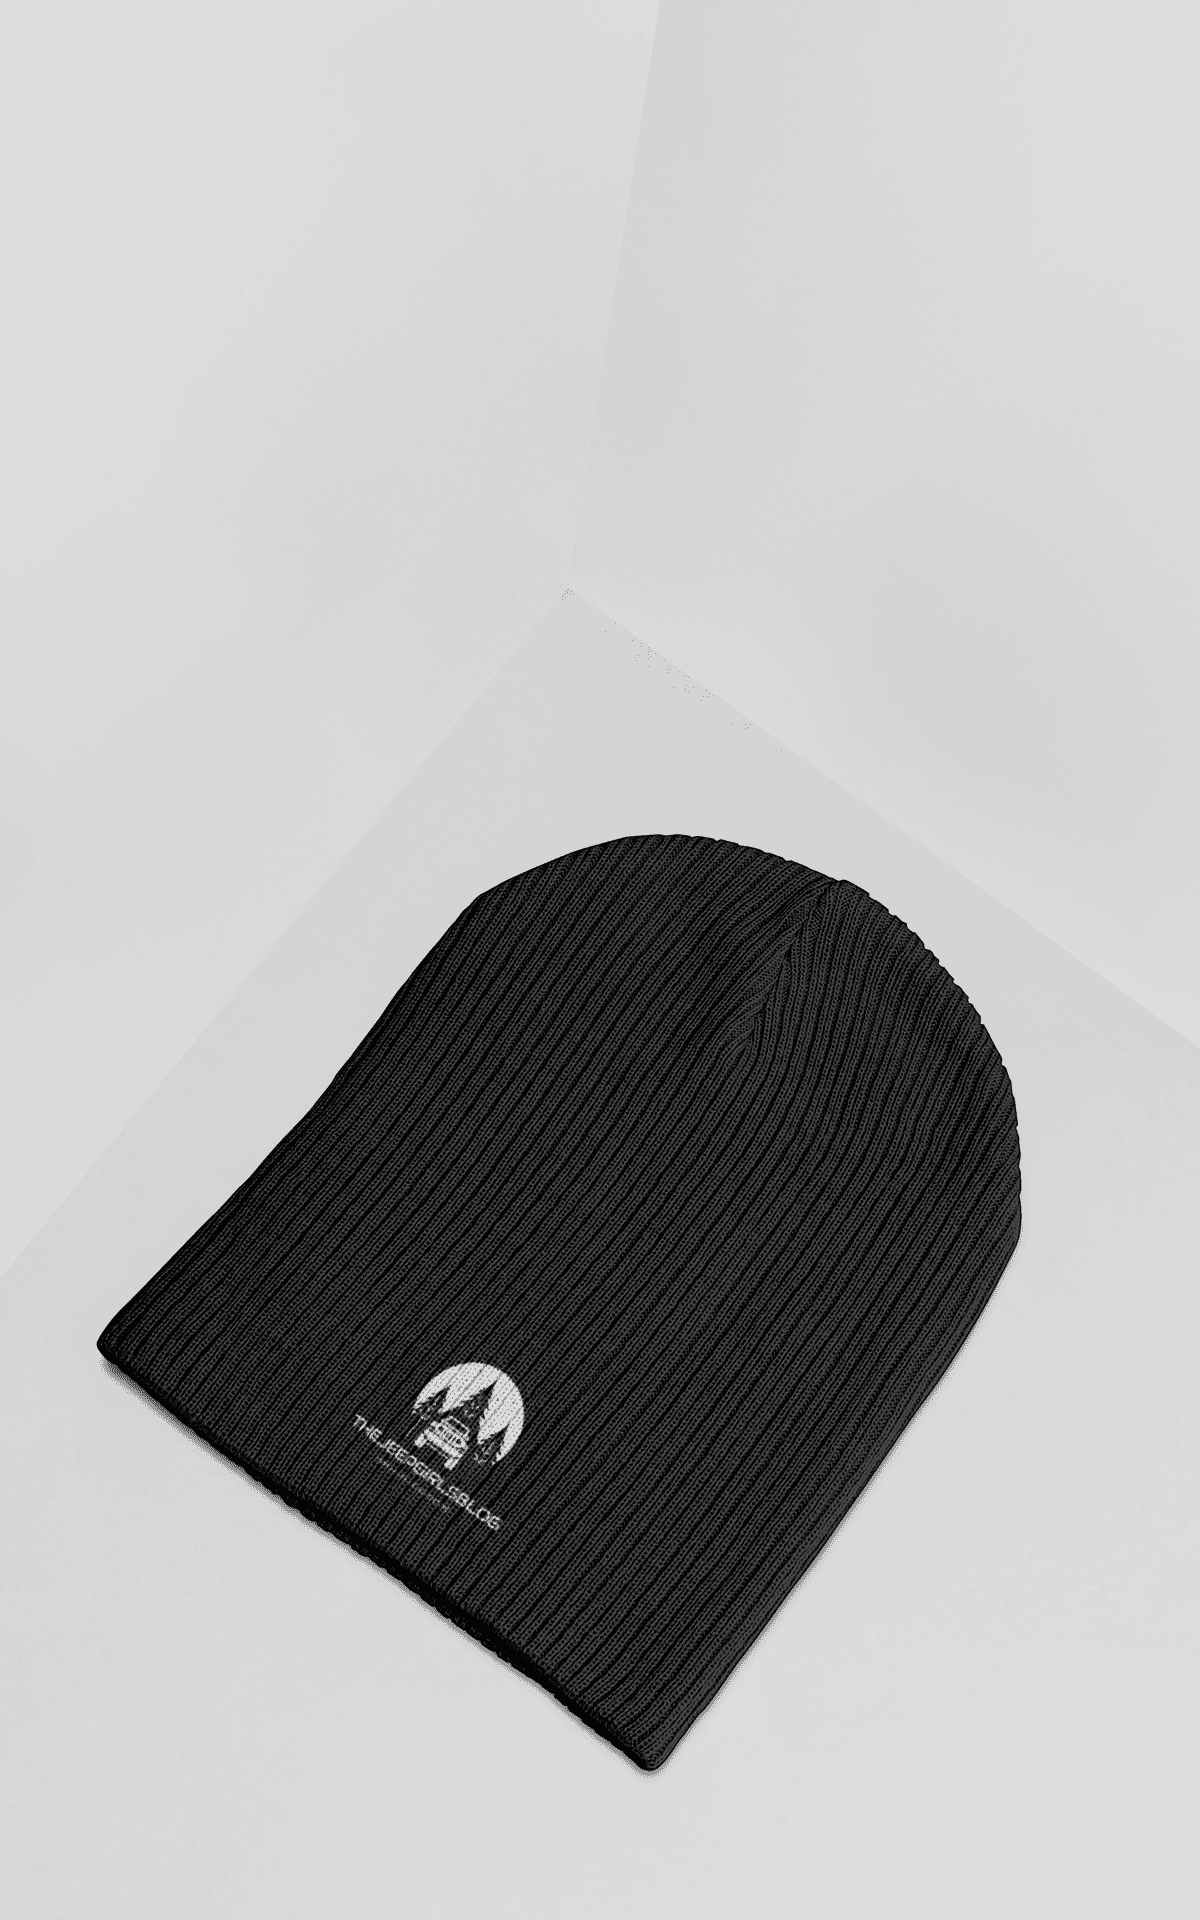 mockup of a knit beanie lying on a colored surface 25182 2 edited